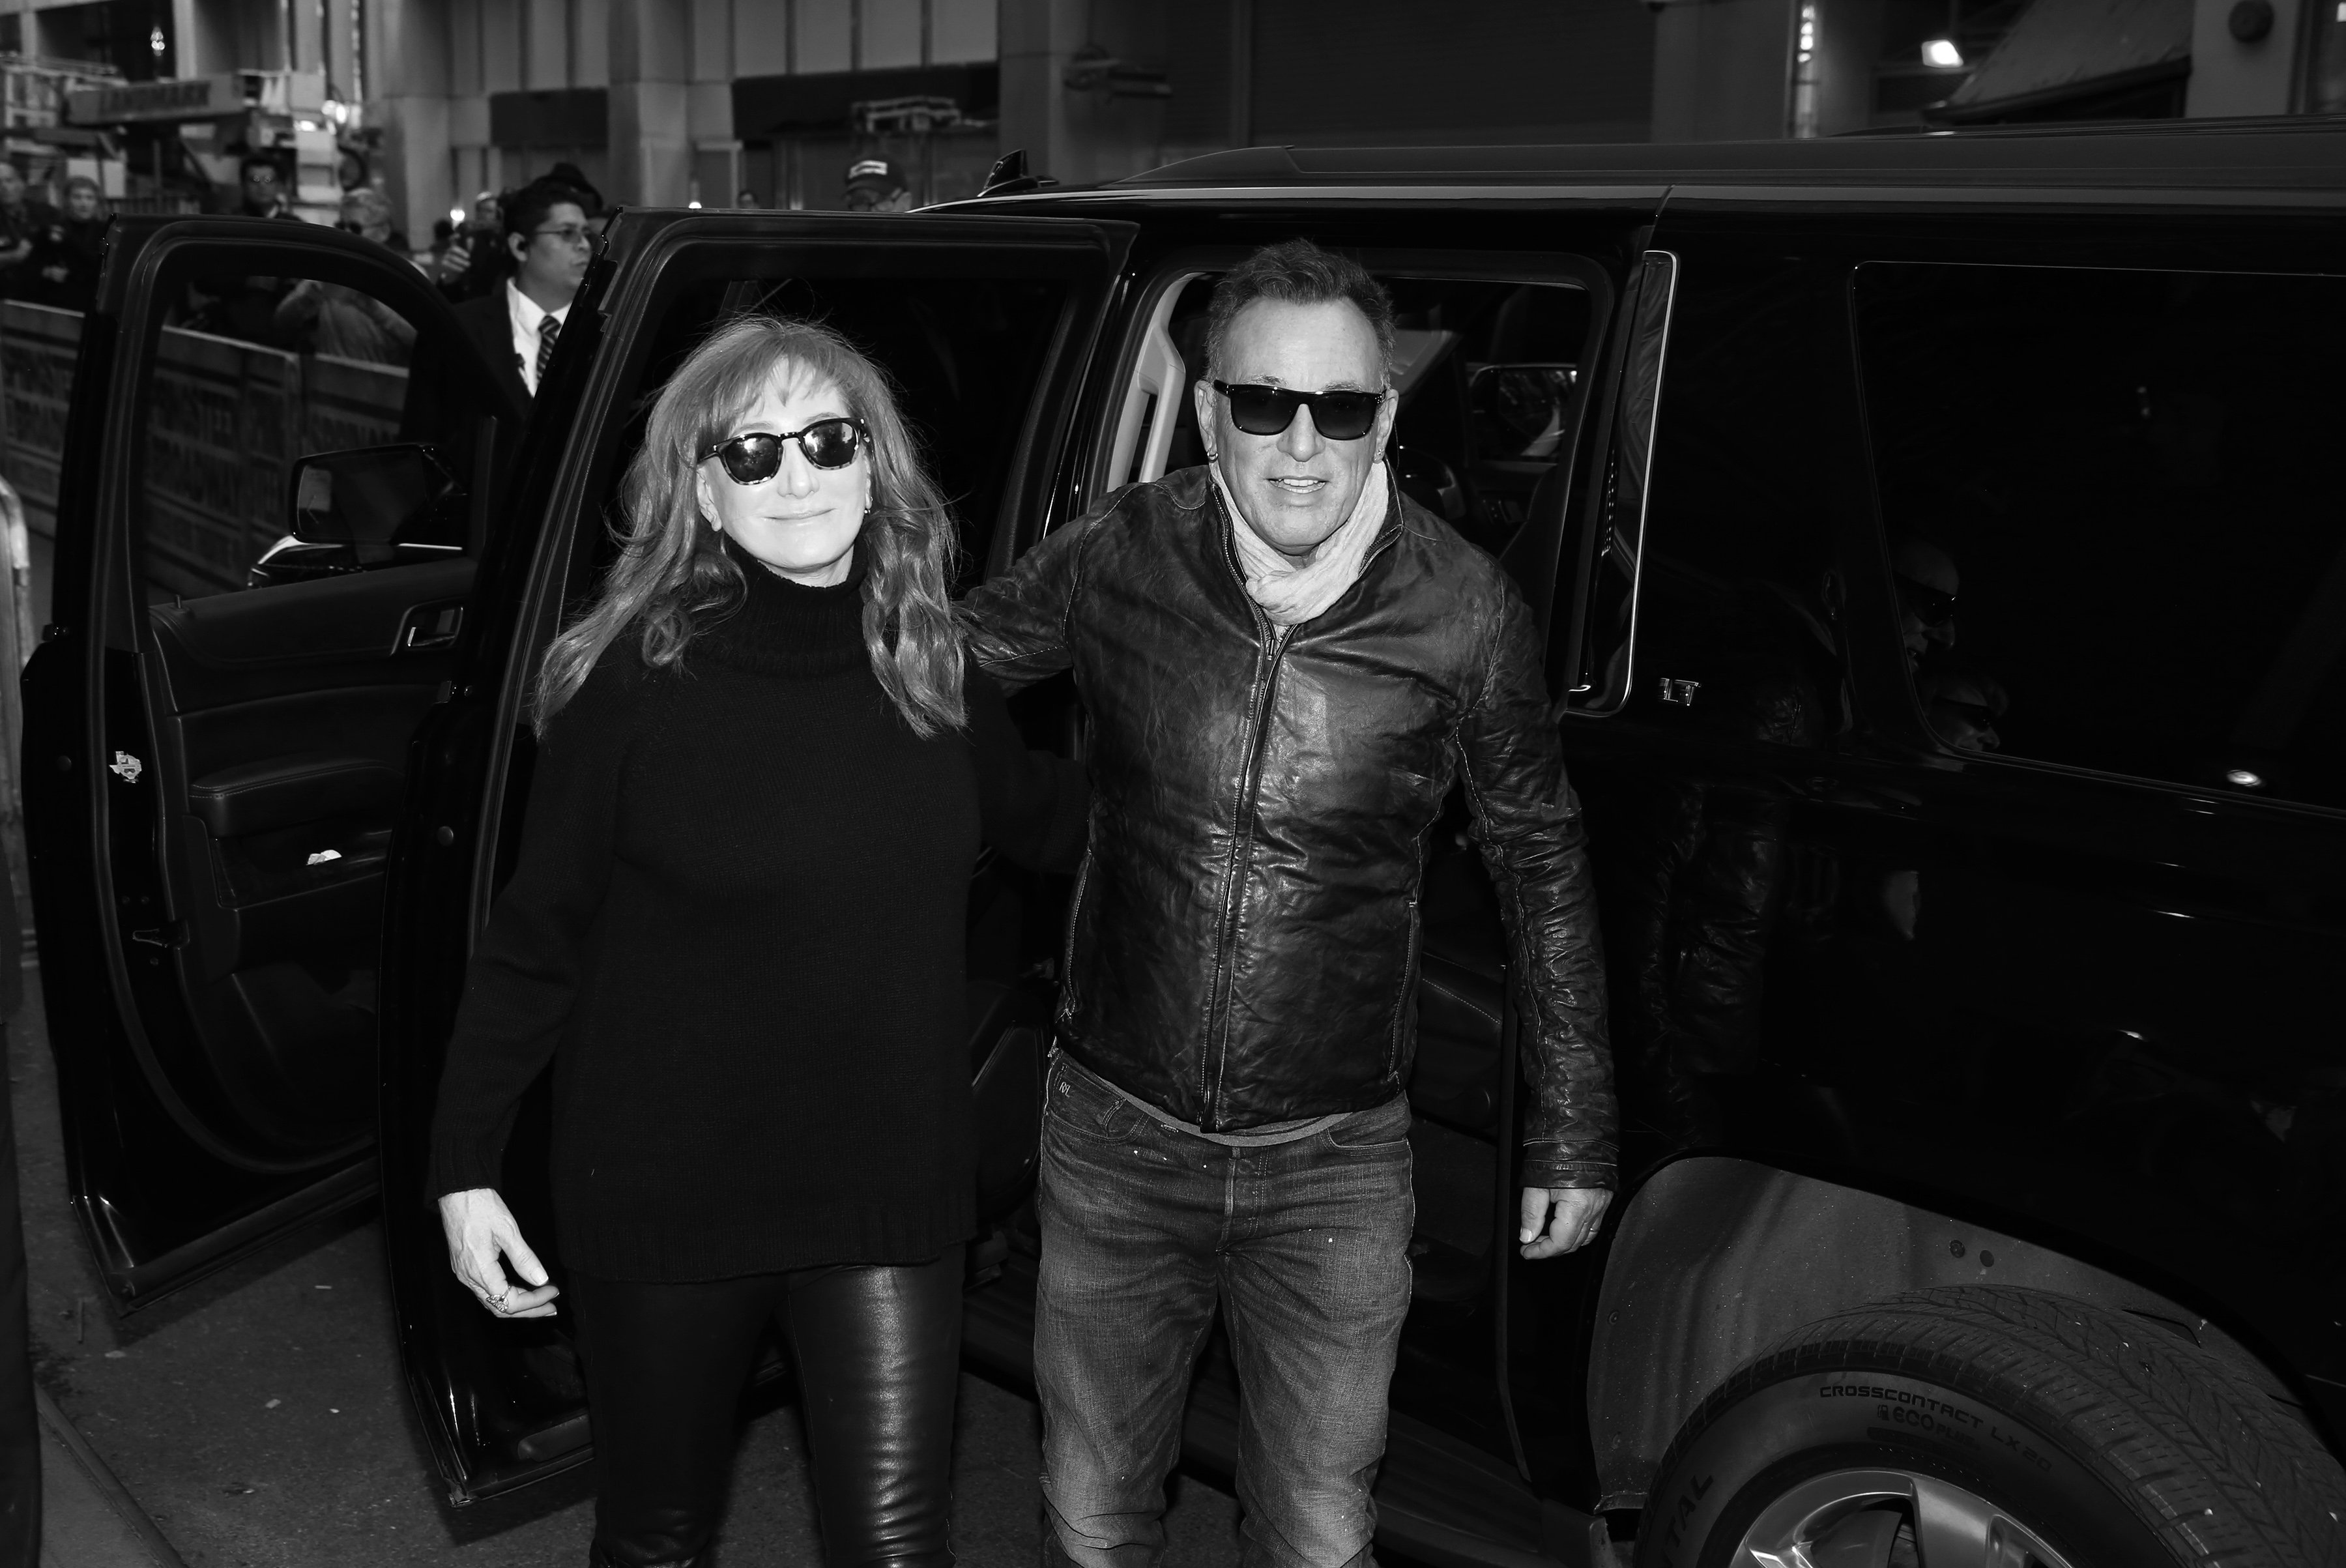 Patti Scialfa and Bruce Springsteen arriving at the Walter Kerr Theater for the official opening night performance of "Springsteen On Broadway" on October 12, 2017 in New York City. | Source: Getty Images